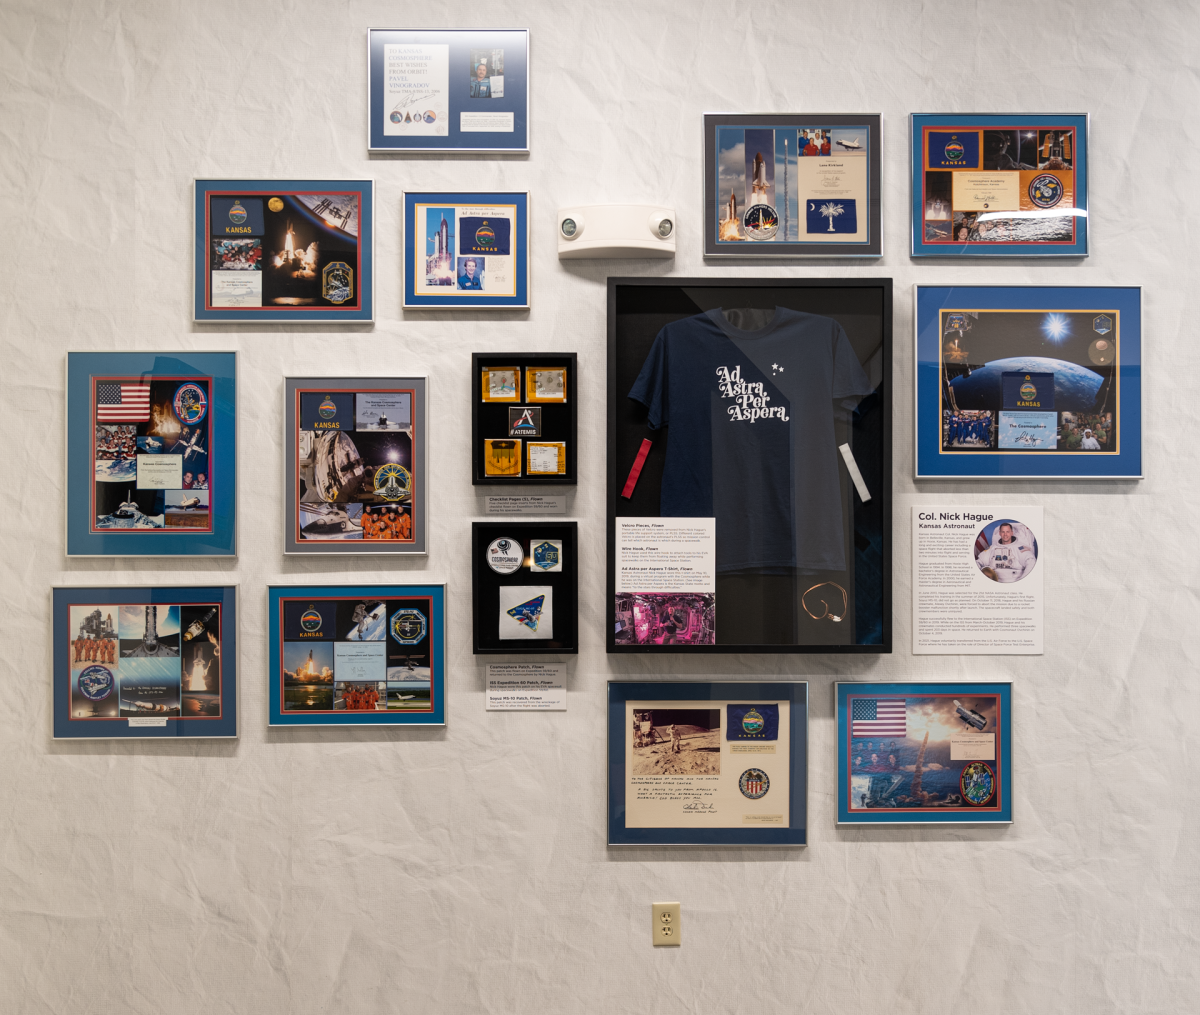 Items flown in space are displayed as part of the "Flags and More: Items Flown in Space" exhibit at Kansas Cosmosphere